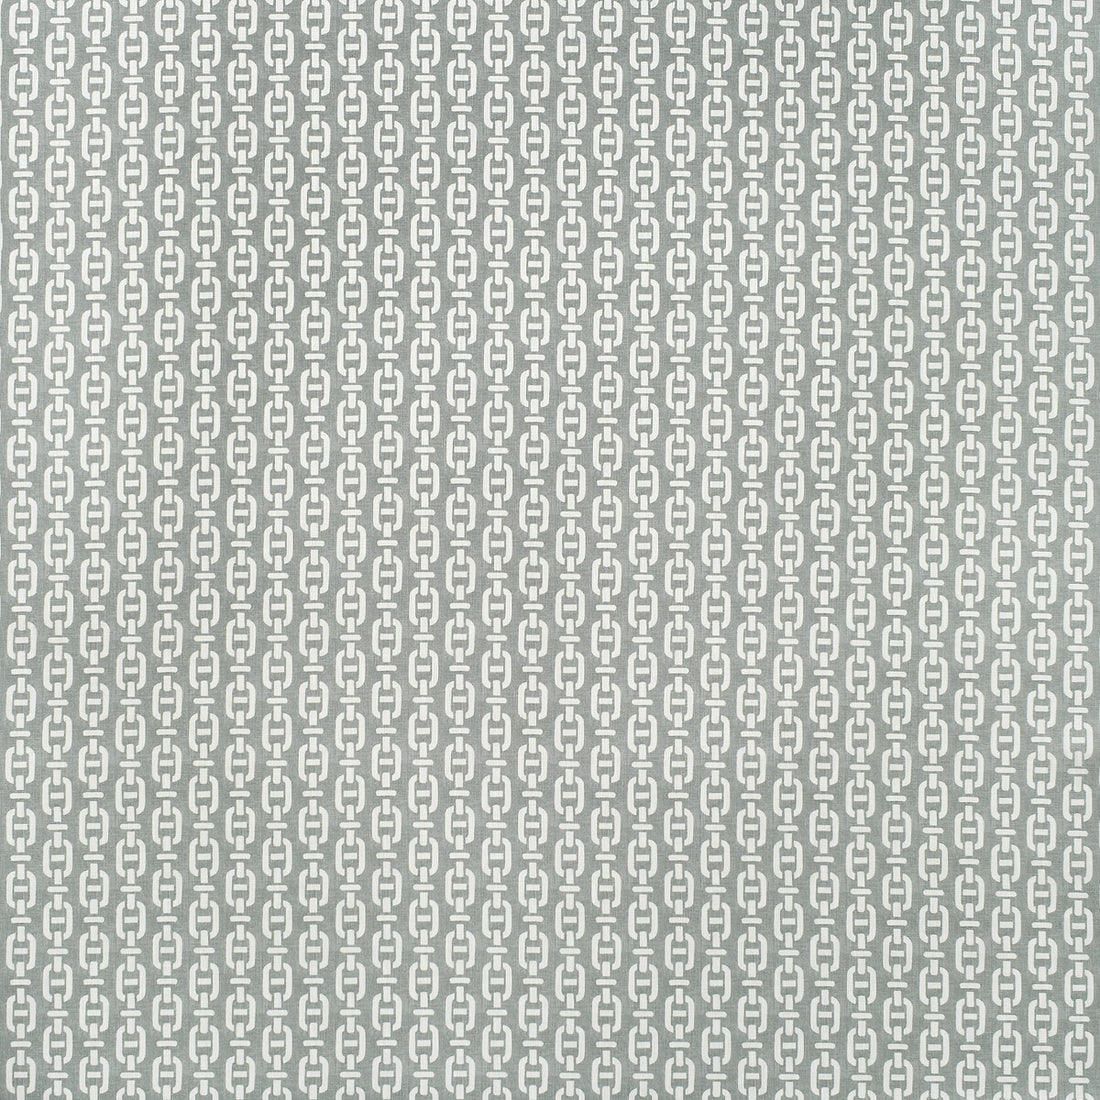 Burlington Outdoor fabric in storm color - pattern AM100387.21.0 - by Kravet Couture in the Andrew Martin Sophie Patterson Outdoor collection